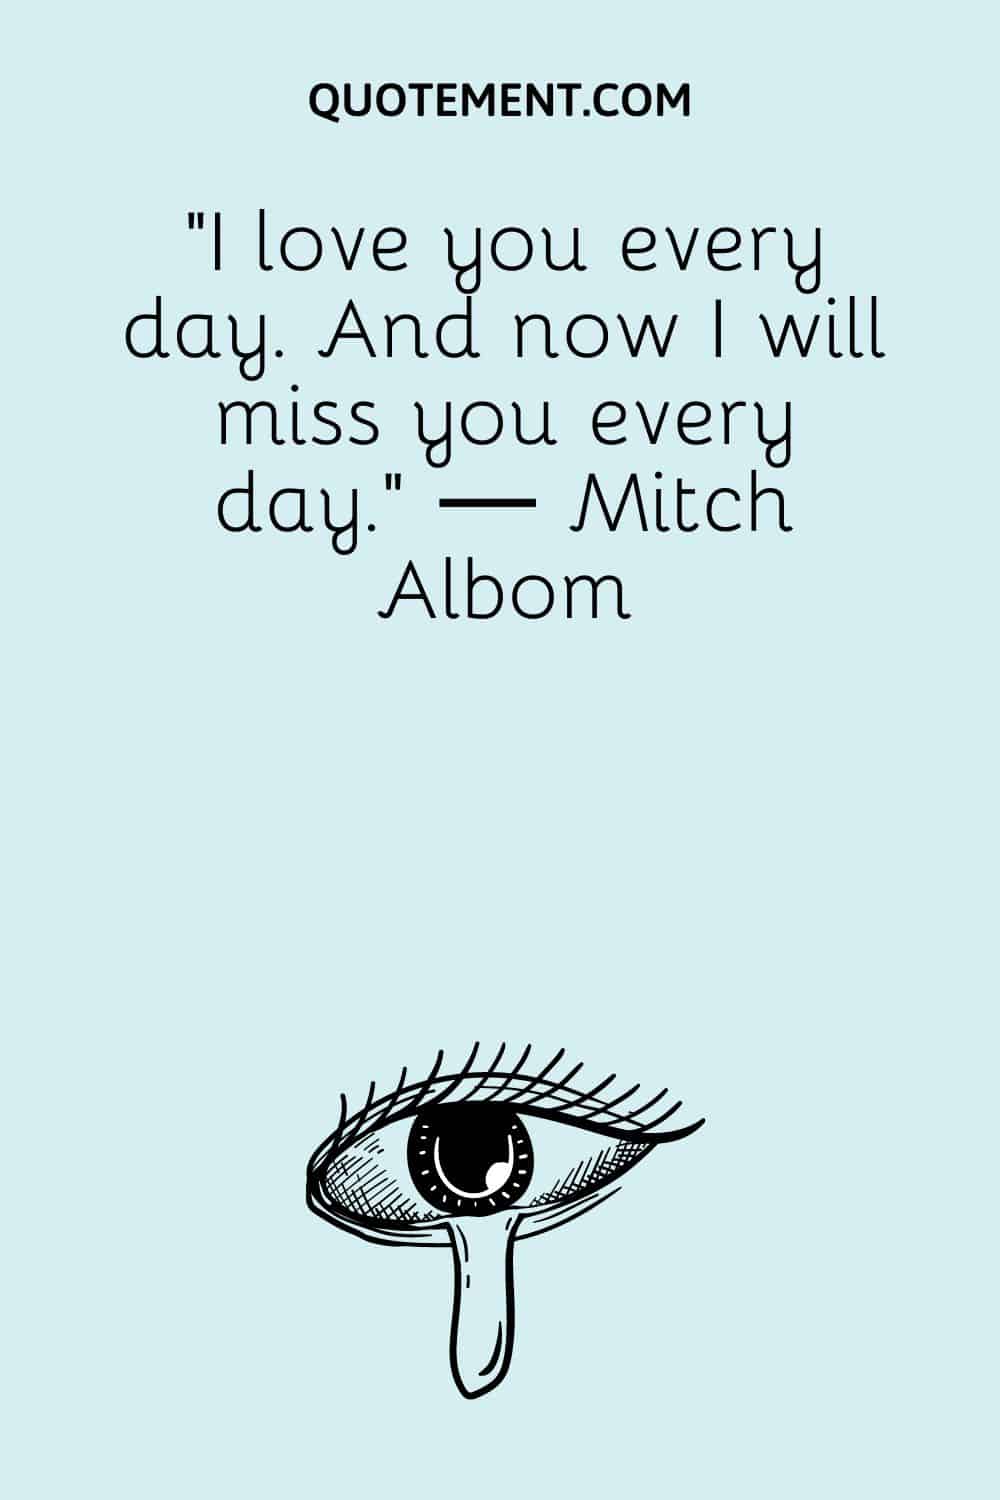 “I love you every day. And now I will miss you every day.” ― Mitch Albom